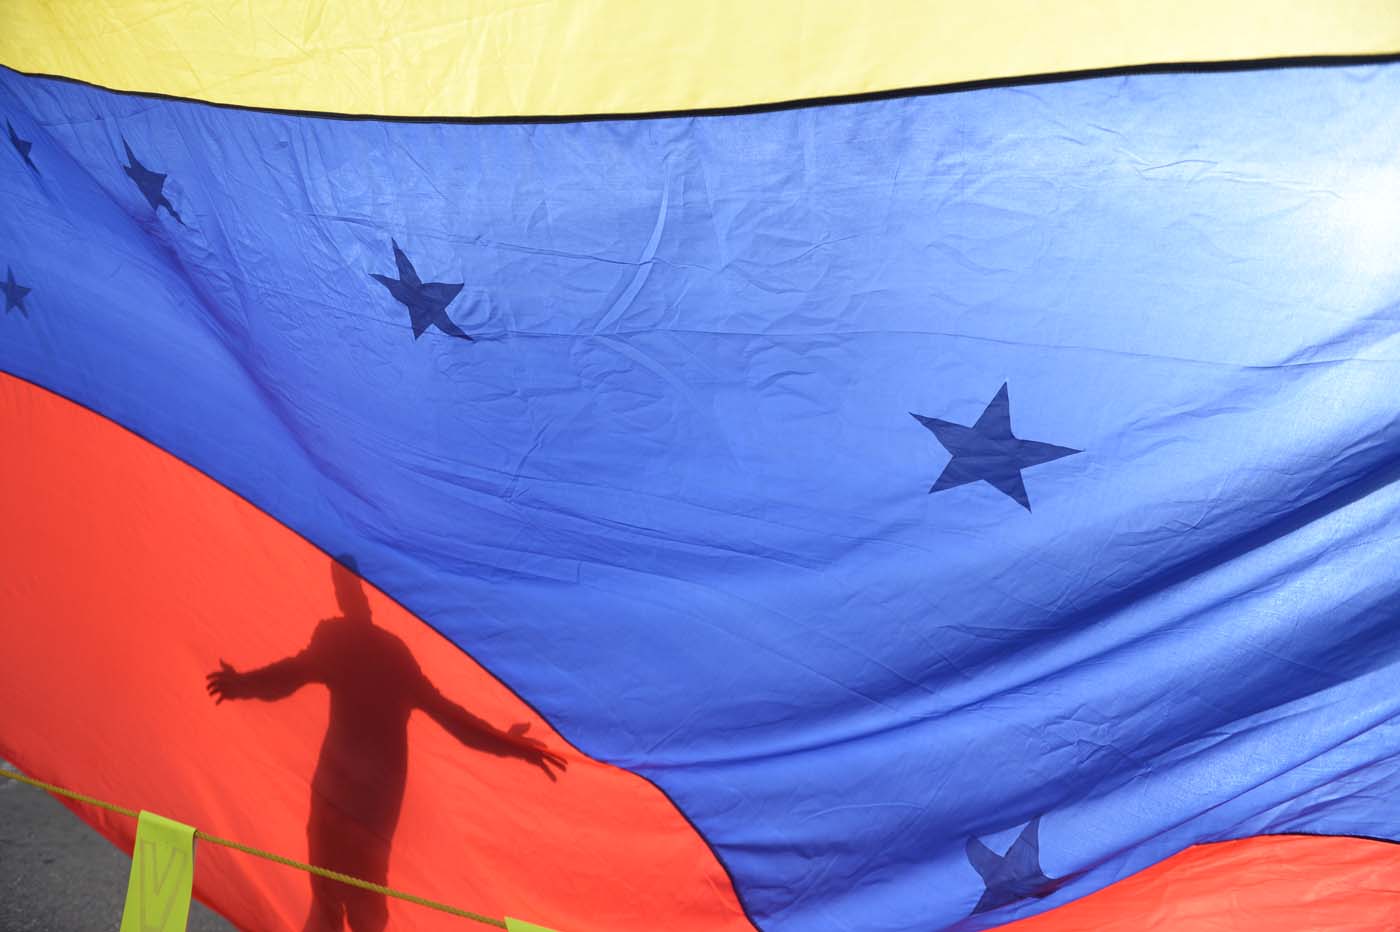 A person's shadow is cast on a Venezuelan national flag in Caracas on July 10, 2017. Venezuela hit its 100th day of anti-government protests Sunday, amid uncertainty over whether the release from prison a day earlier of prominent political prisoner Leopoldo Lopez might open the way to negotiations to defuse the profound crisis gripping the country. / AFP PHOTO / FEDERICO PARRA